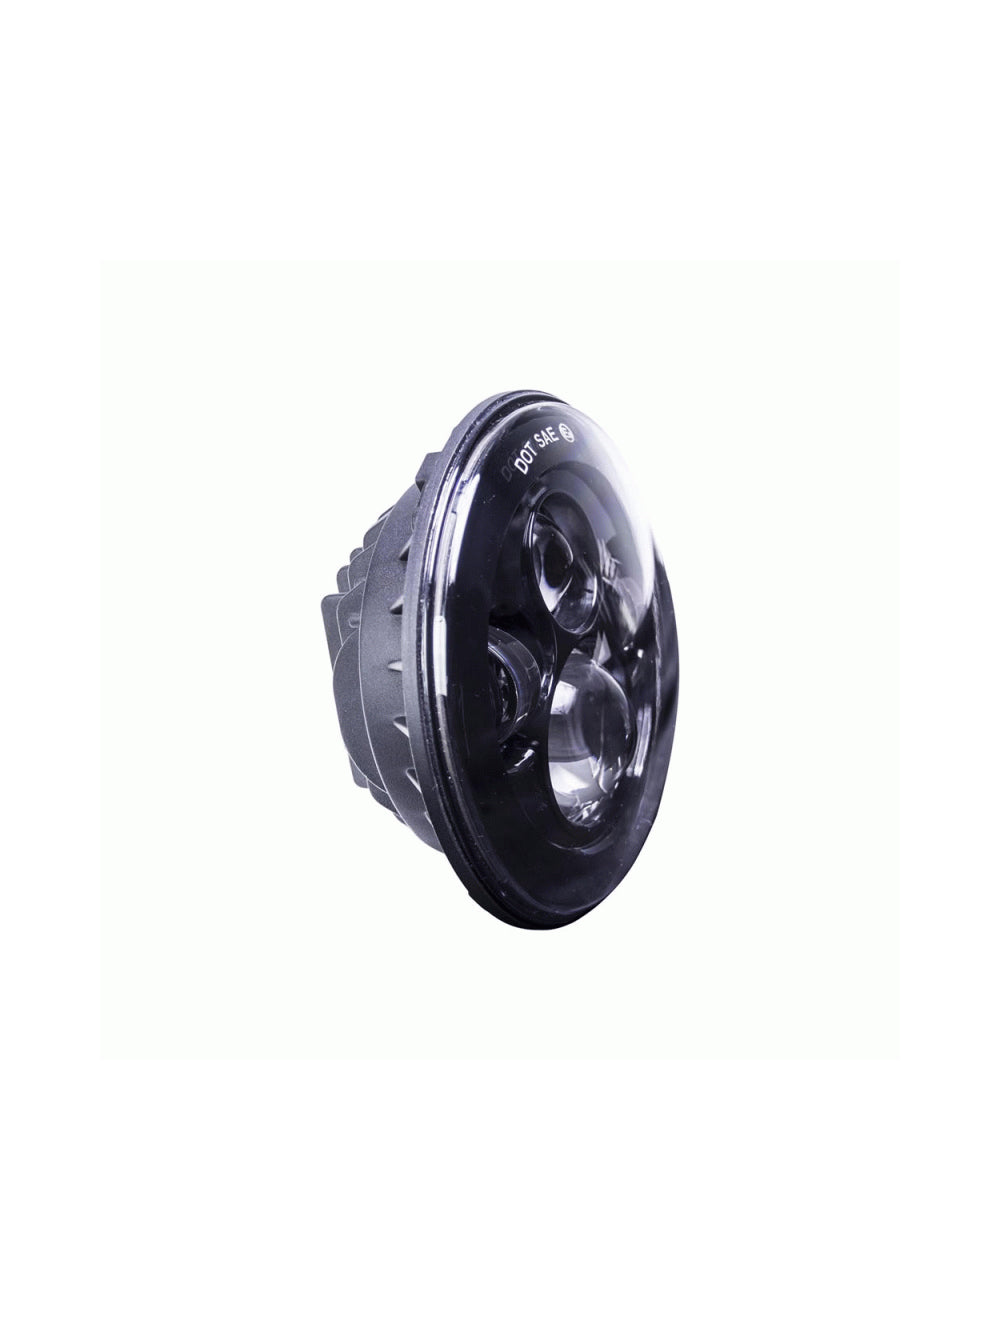 Heise HE-BHL701 Motorcycle 7 Inch Round Black Front 6-Led Headlight